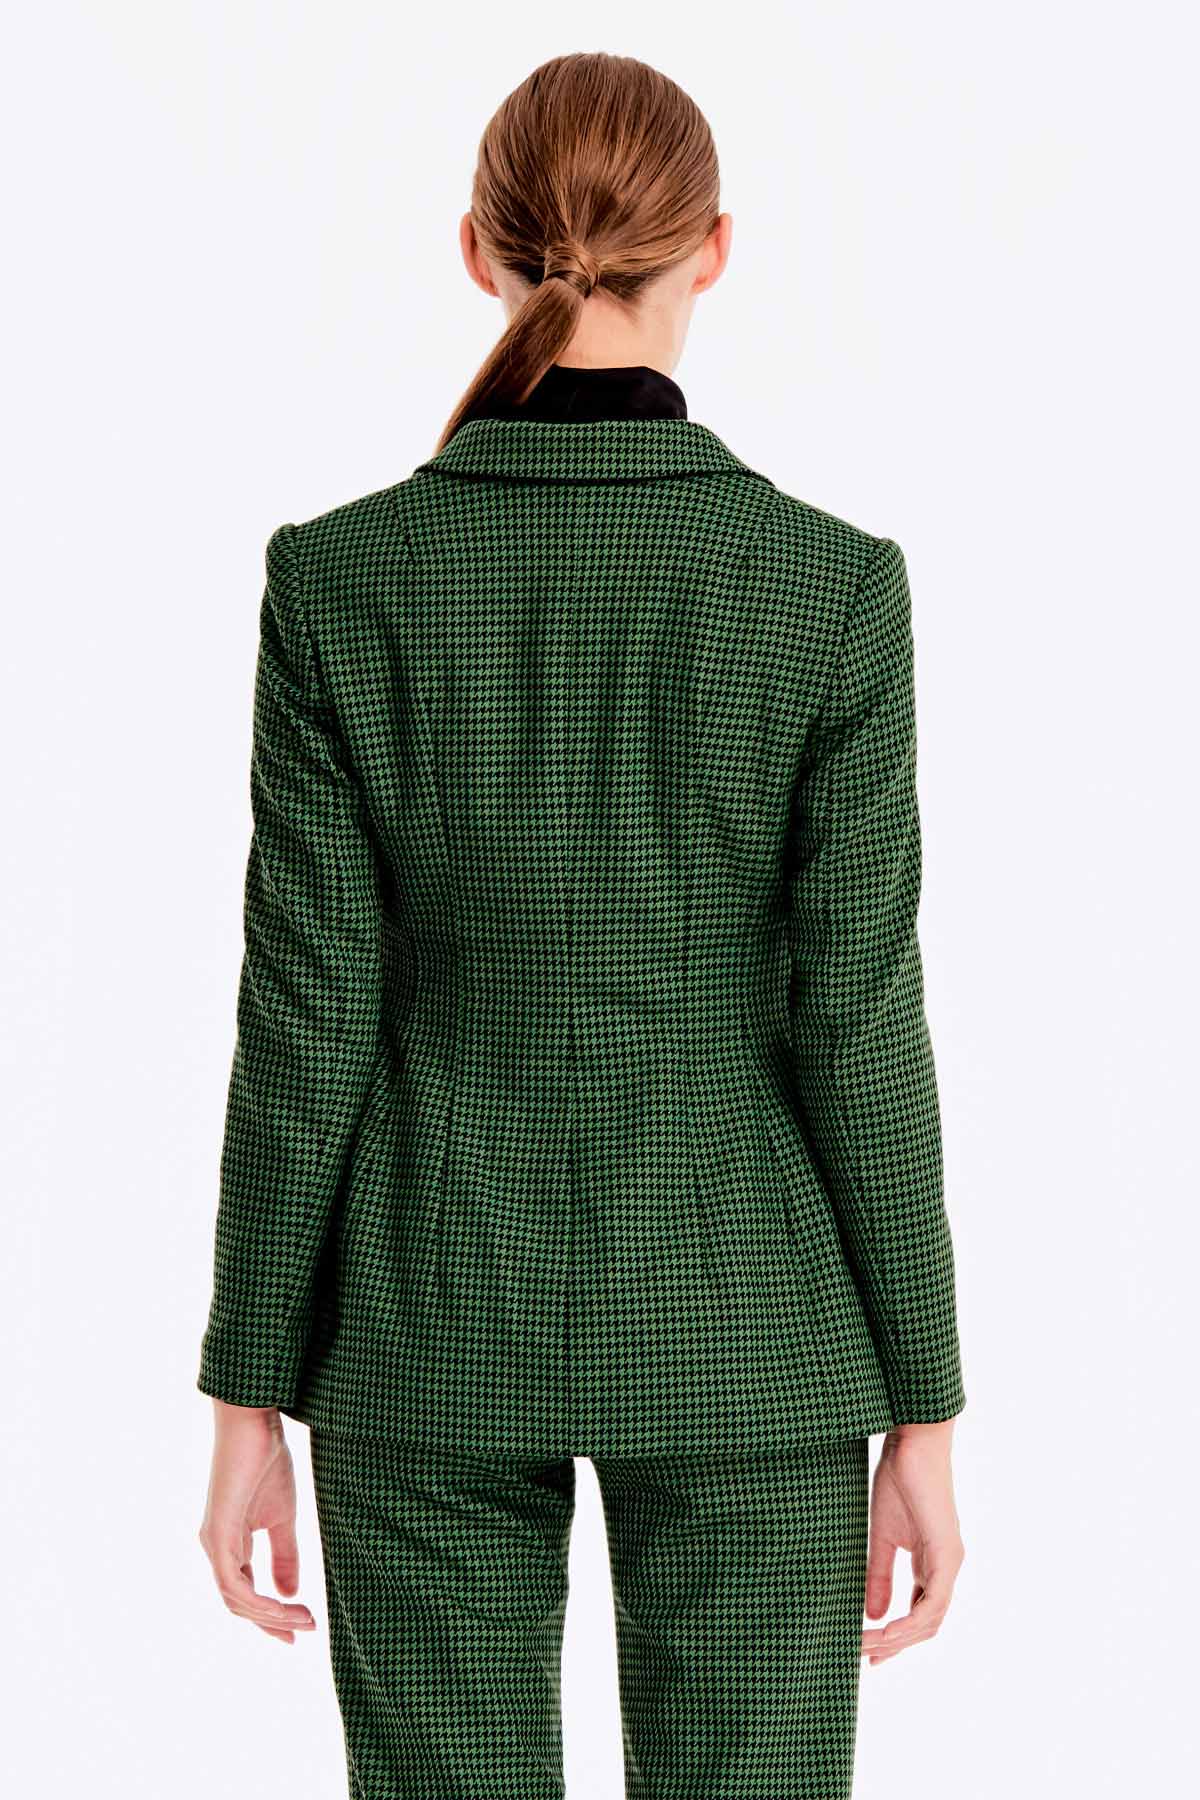 Double-breasted green jacket with a houndstooth print and pockets, photo 3